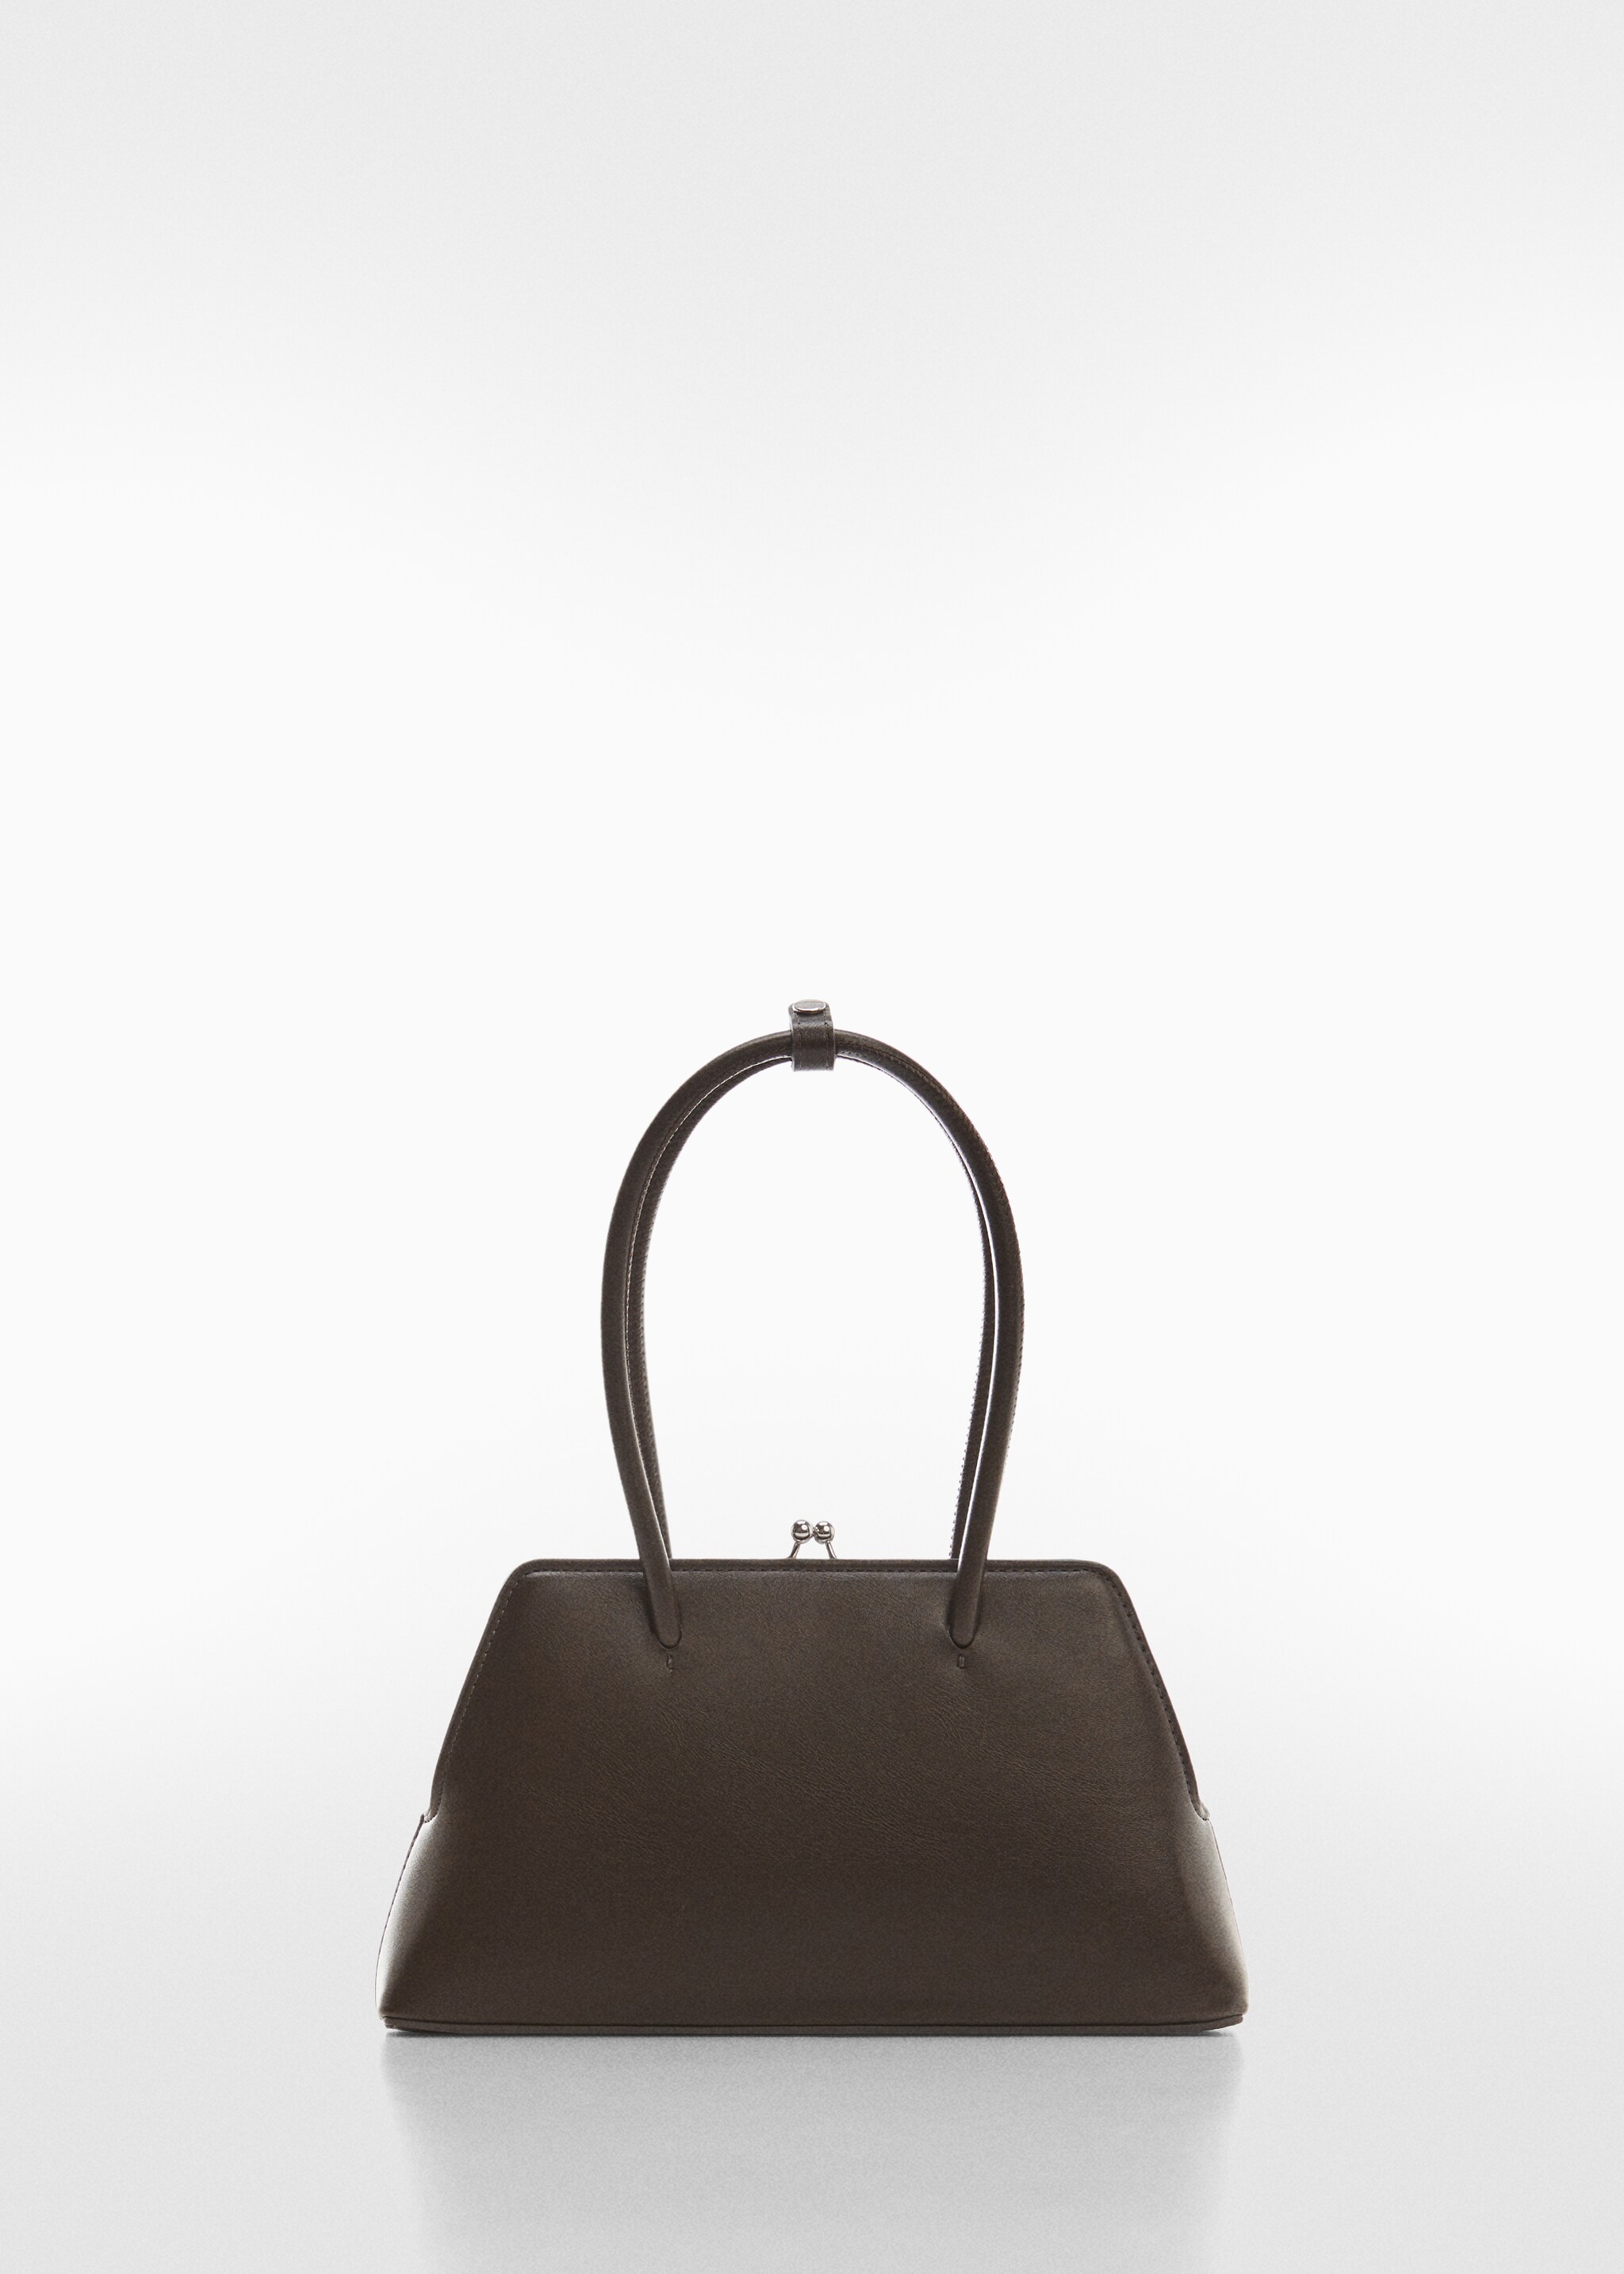 Double strap bag - Article without model